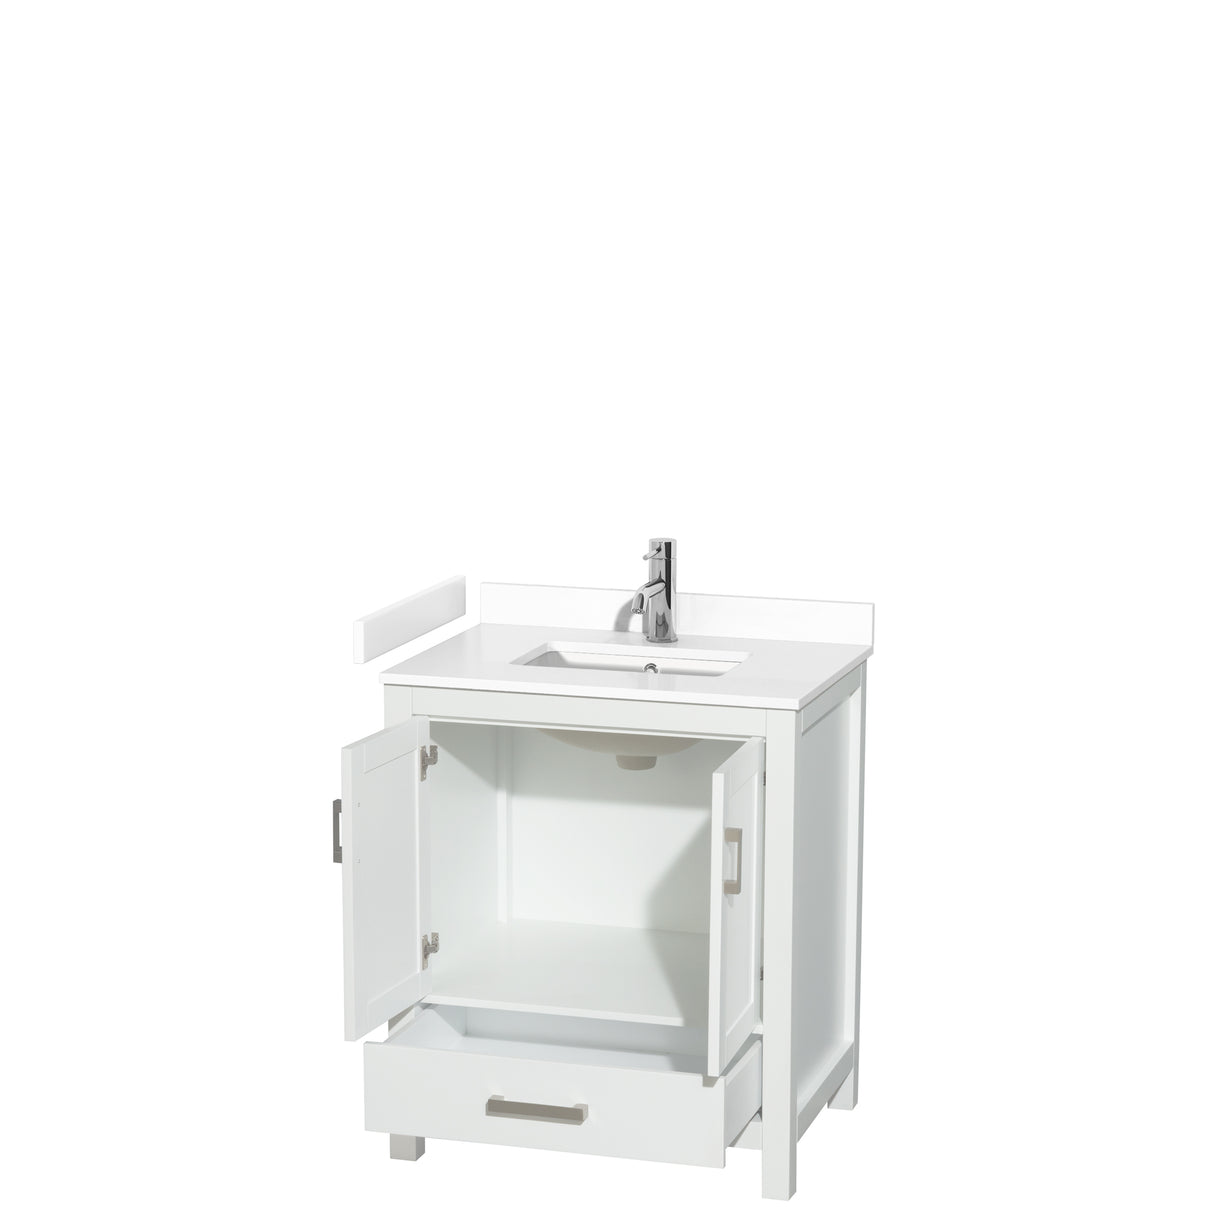 Sheffield 30 Inch Single Bathroom Vanity in White White Cultured Marble Countertop Undermount Square Sink No Mirror